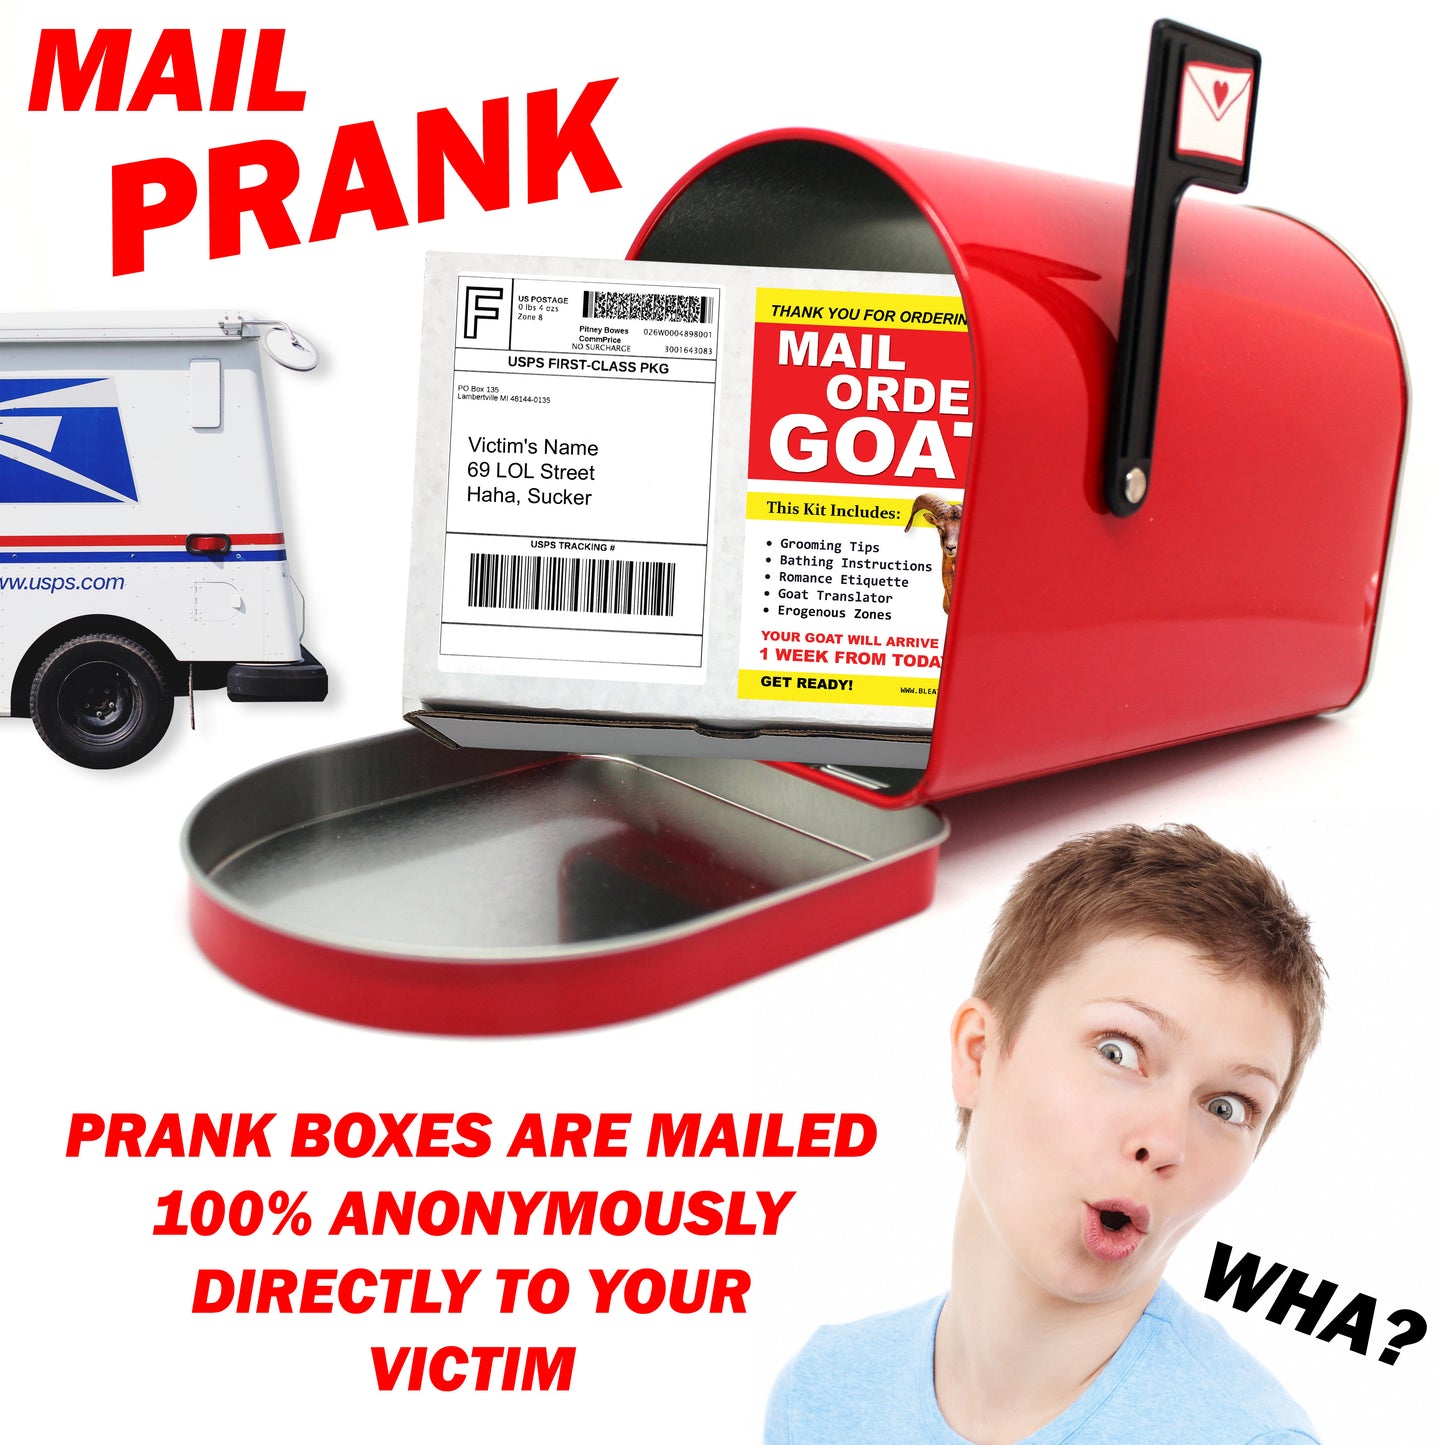 Prank Mail - Mail Order Goat embarrassing prank box gets mailed directly to your victims 100% anonymously!